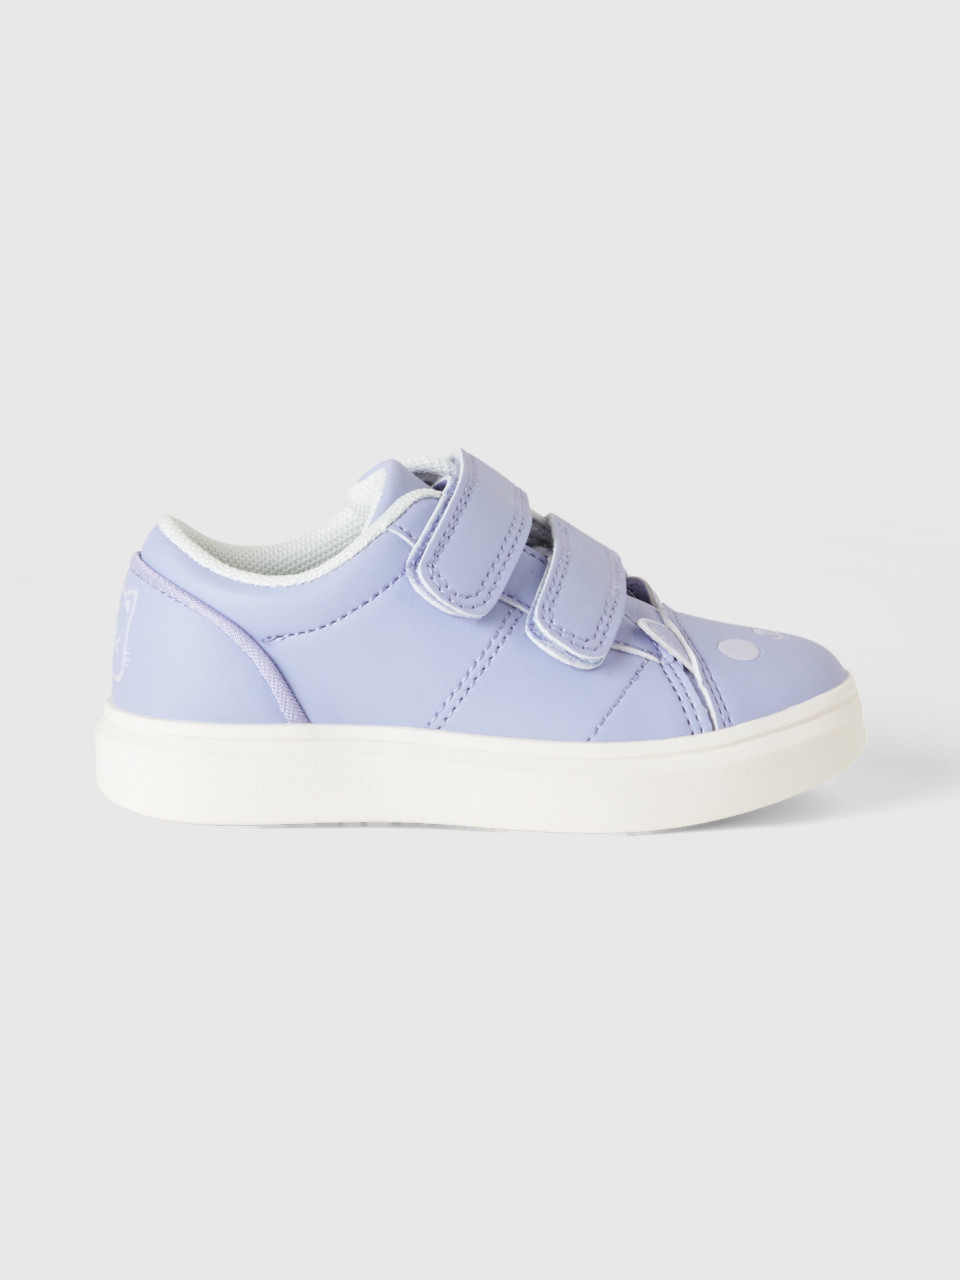 Benetton, Low-top Sneakers With Cat Face,5C, Lilac